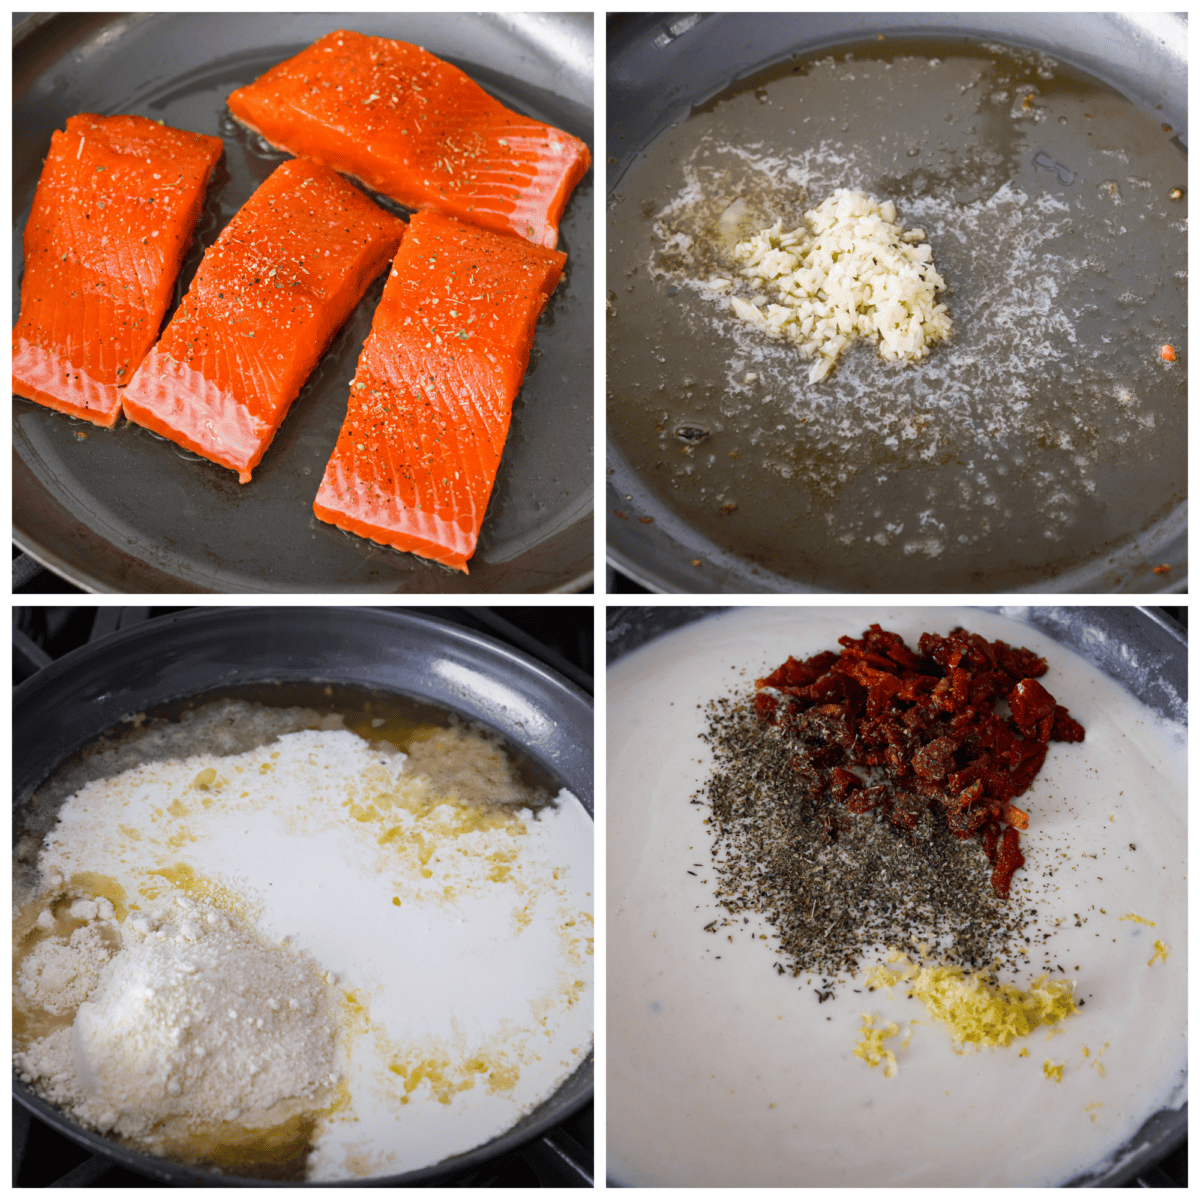 4-photo collage of salmon being cooked and sauce being prepared.